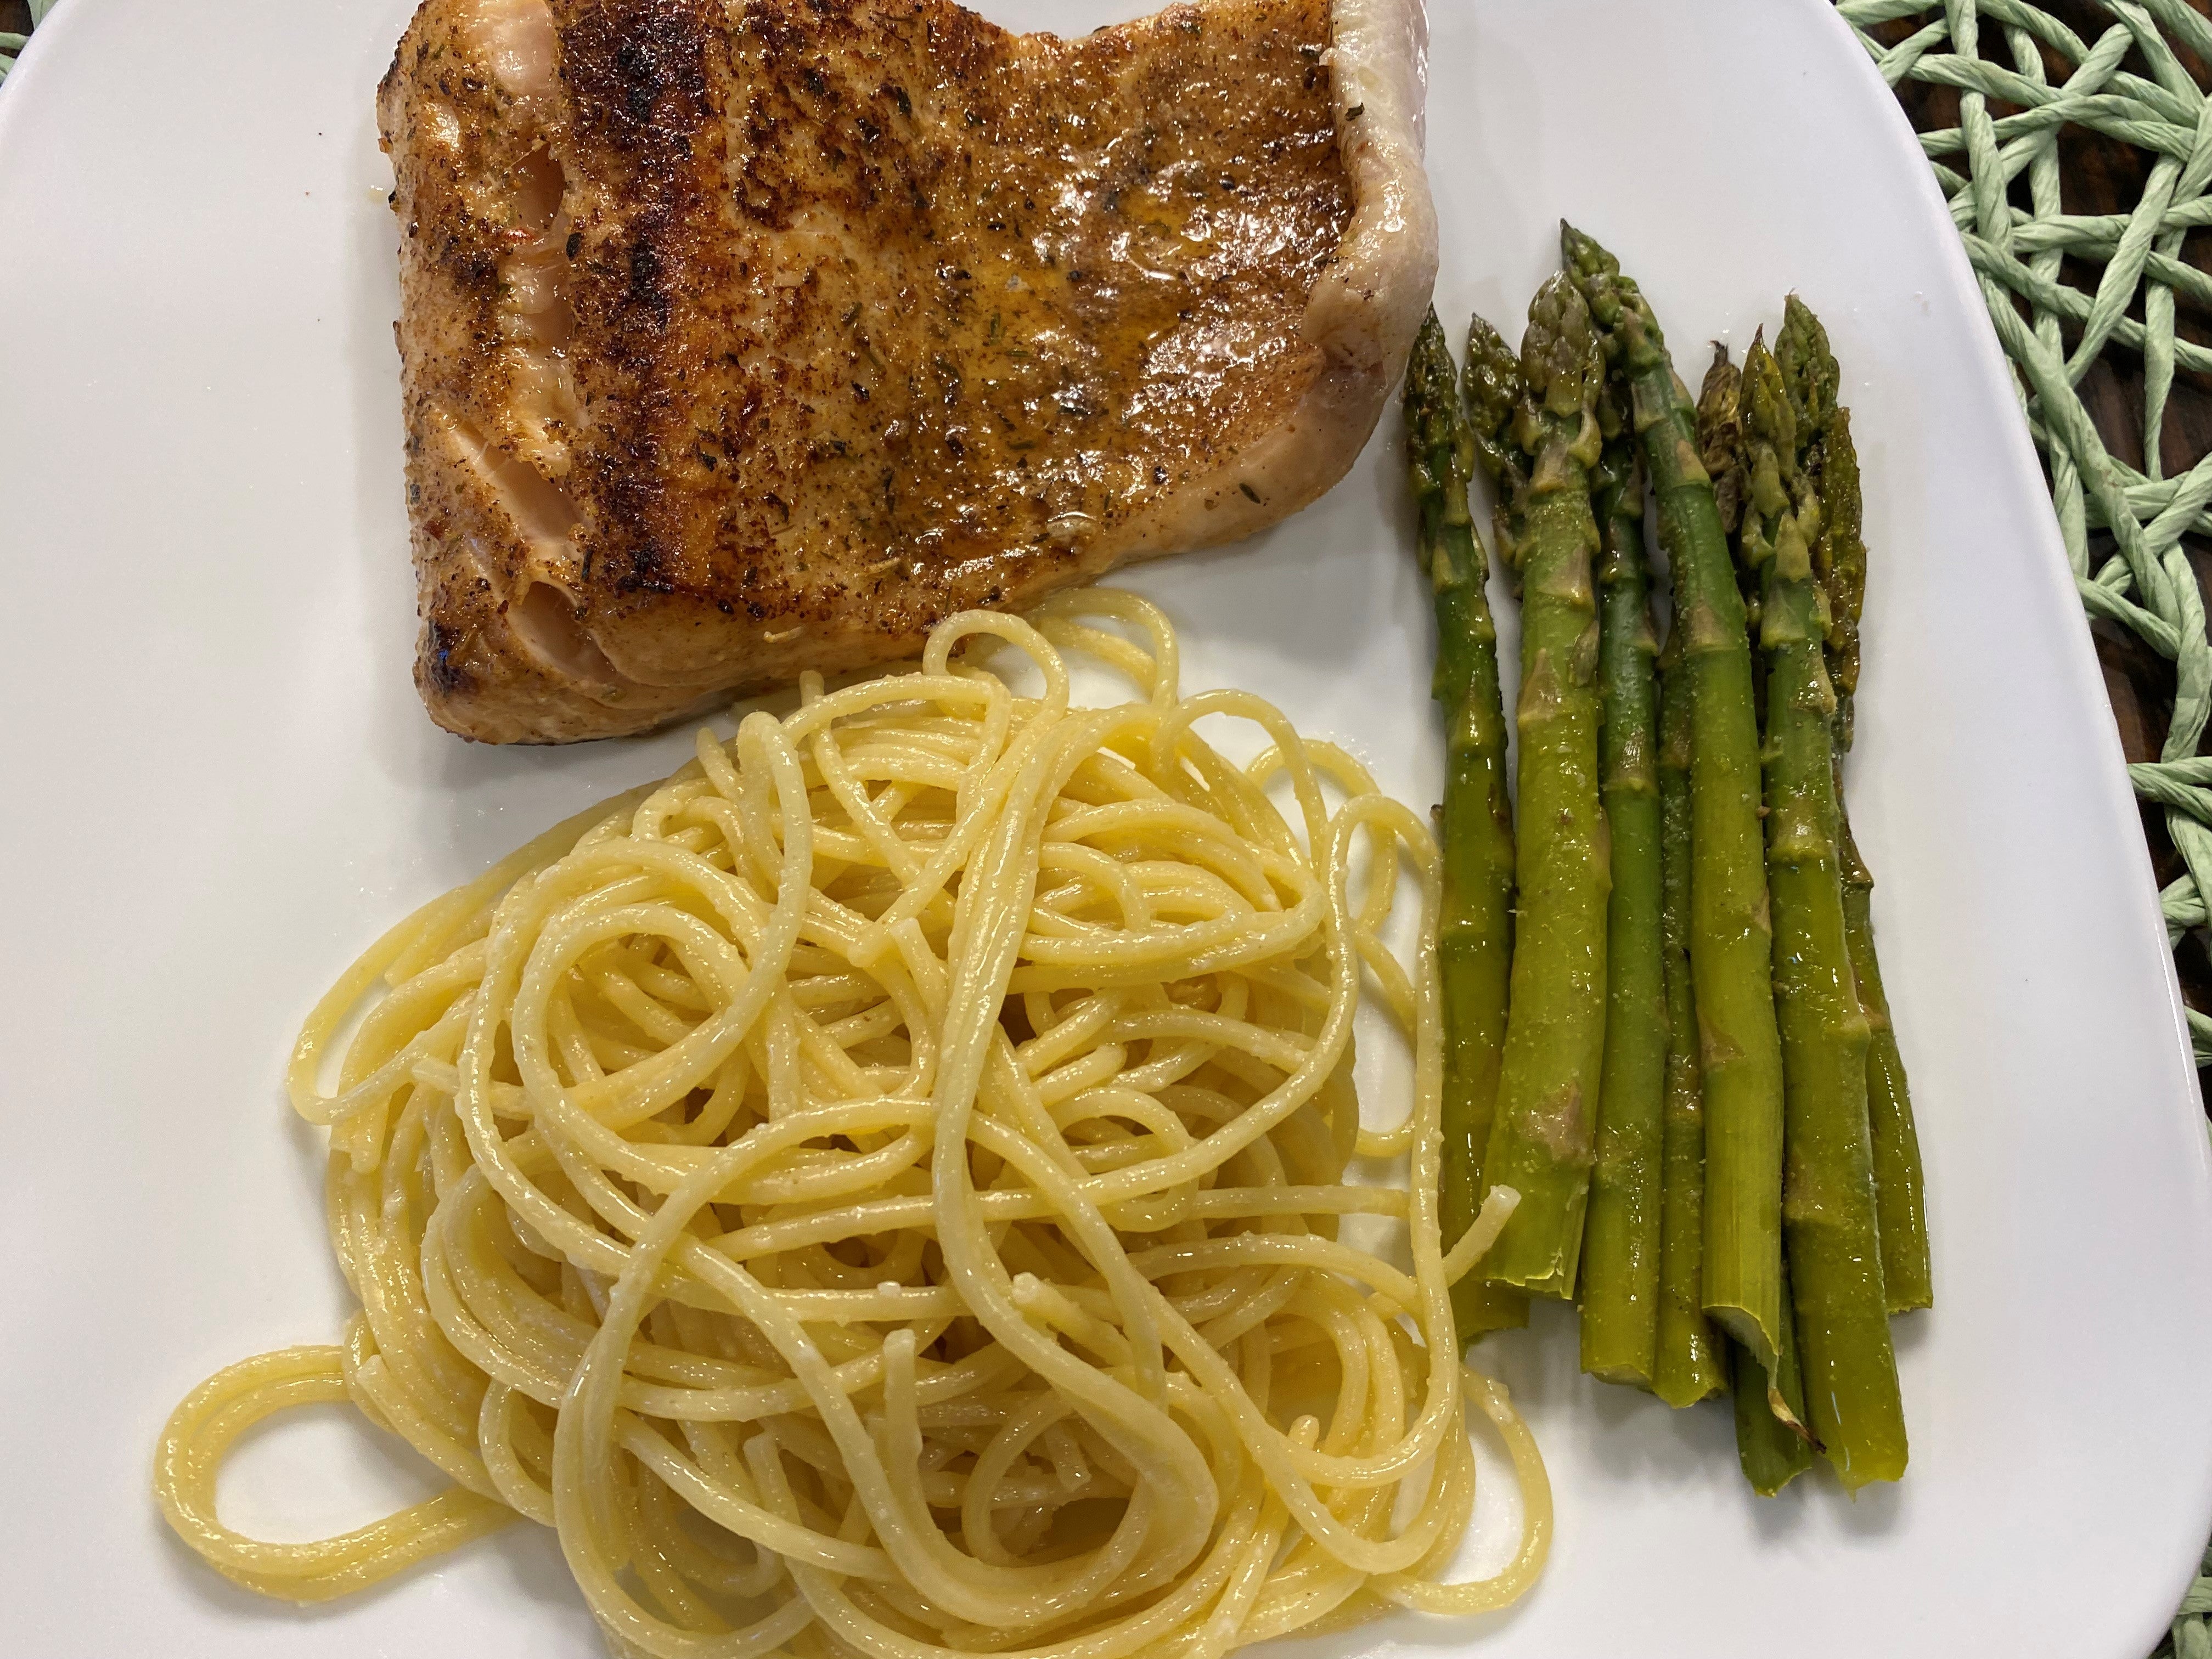 Pan Seared Lake Trout with Roasted Asparagus and Pasta